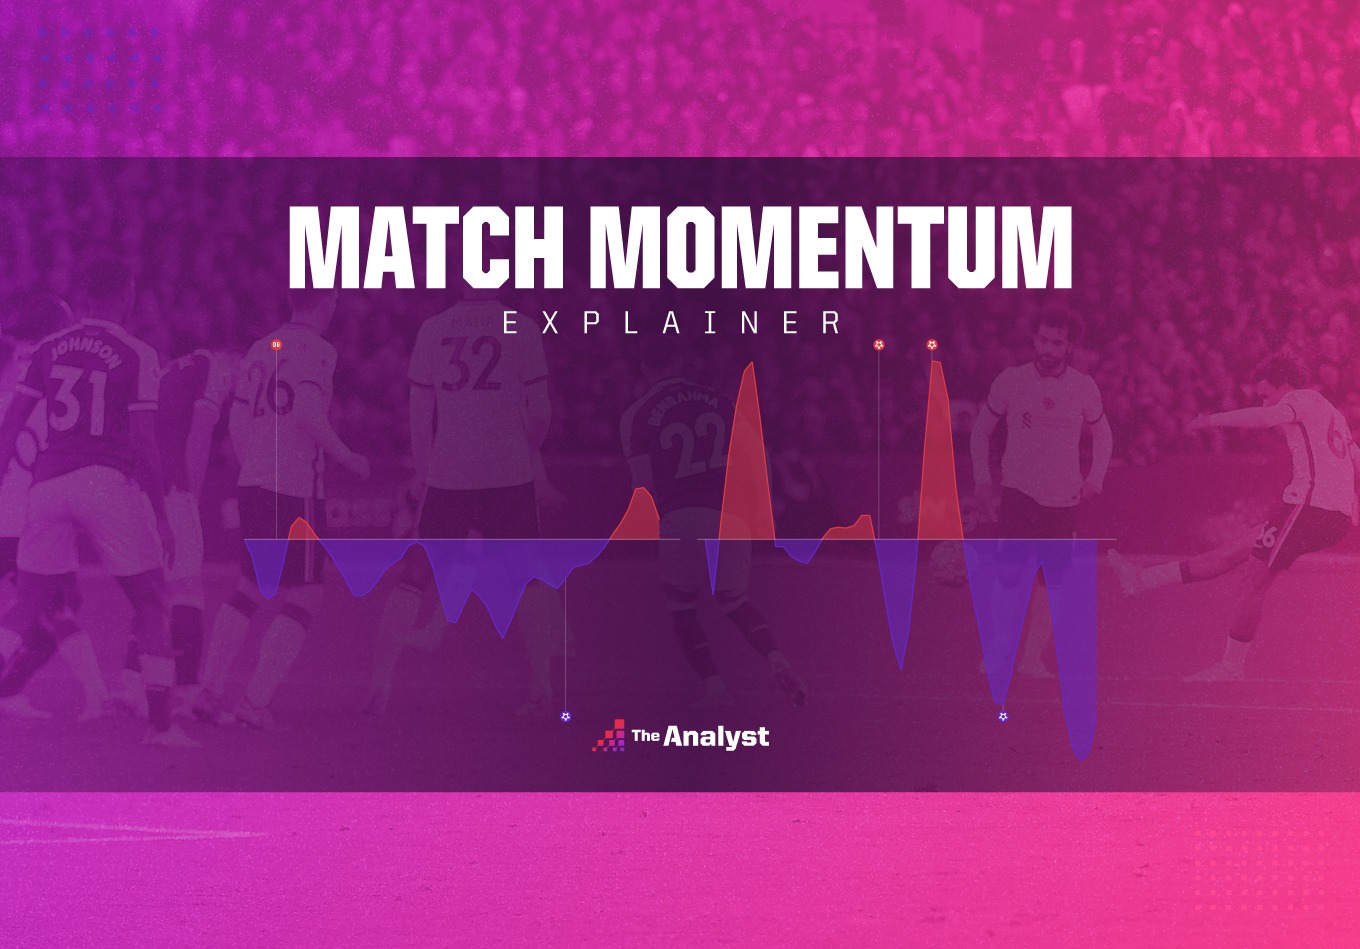 What is Match Momentum?